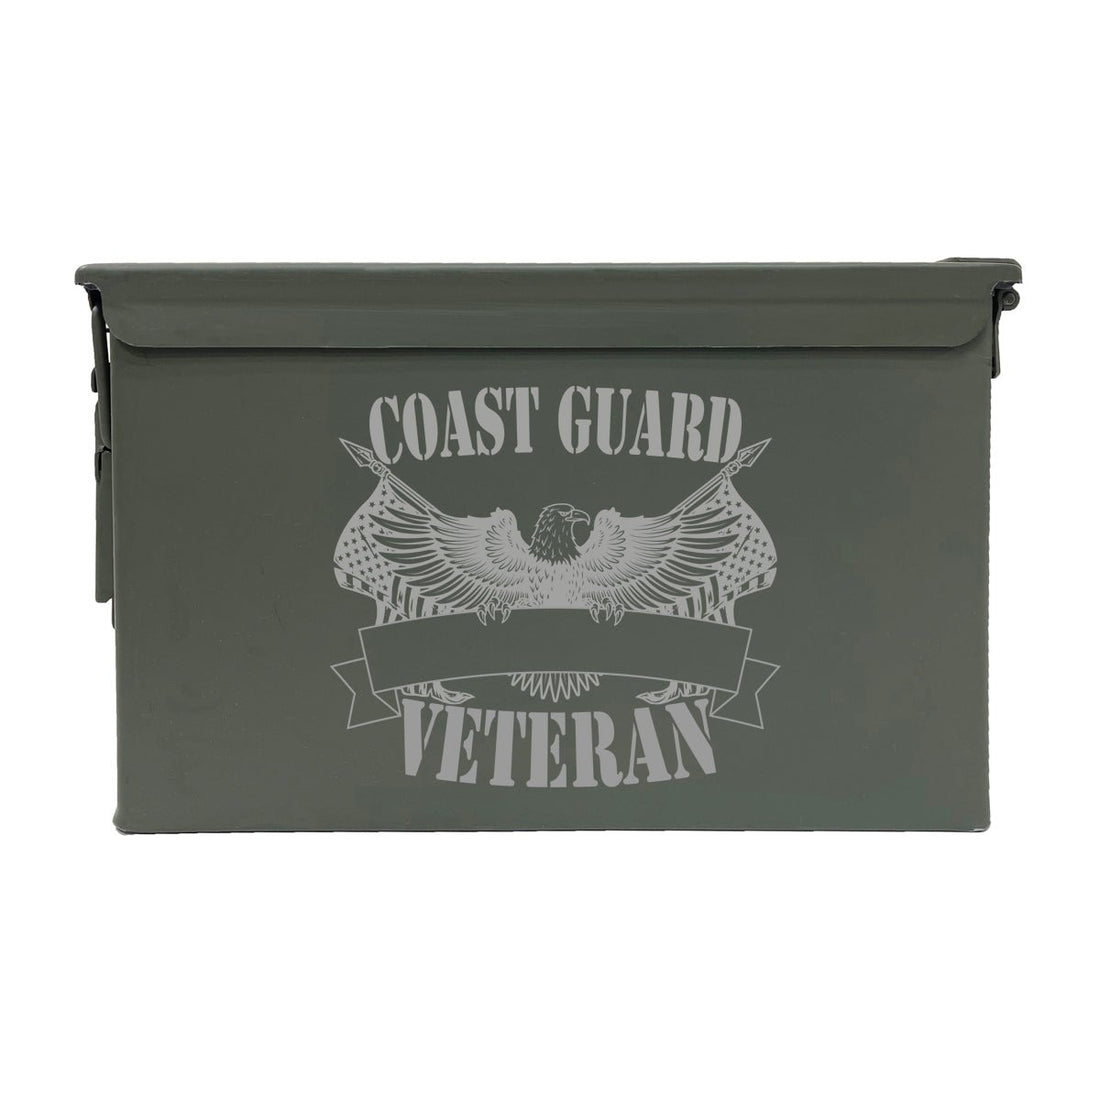 Laser Engraved - COAST GUARD - Veteran Used Grade 1 Ammo Cans - 30 Cal, 50 Cal or Fat 50 - ATOM Promotions